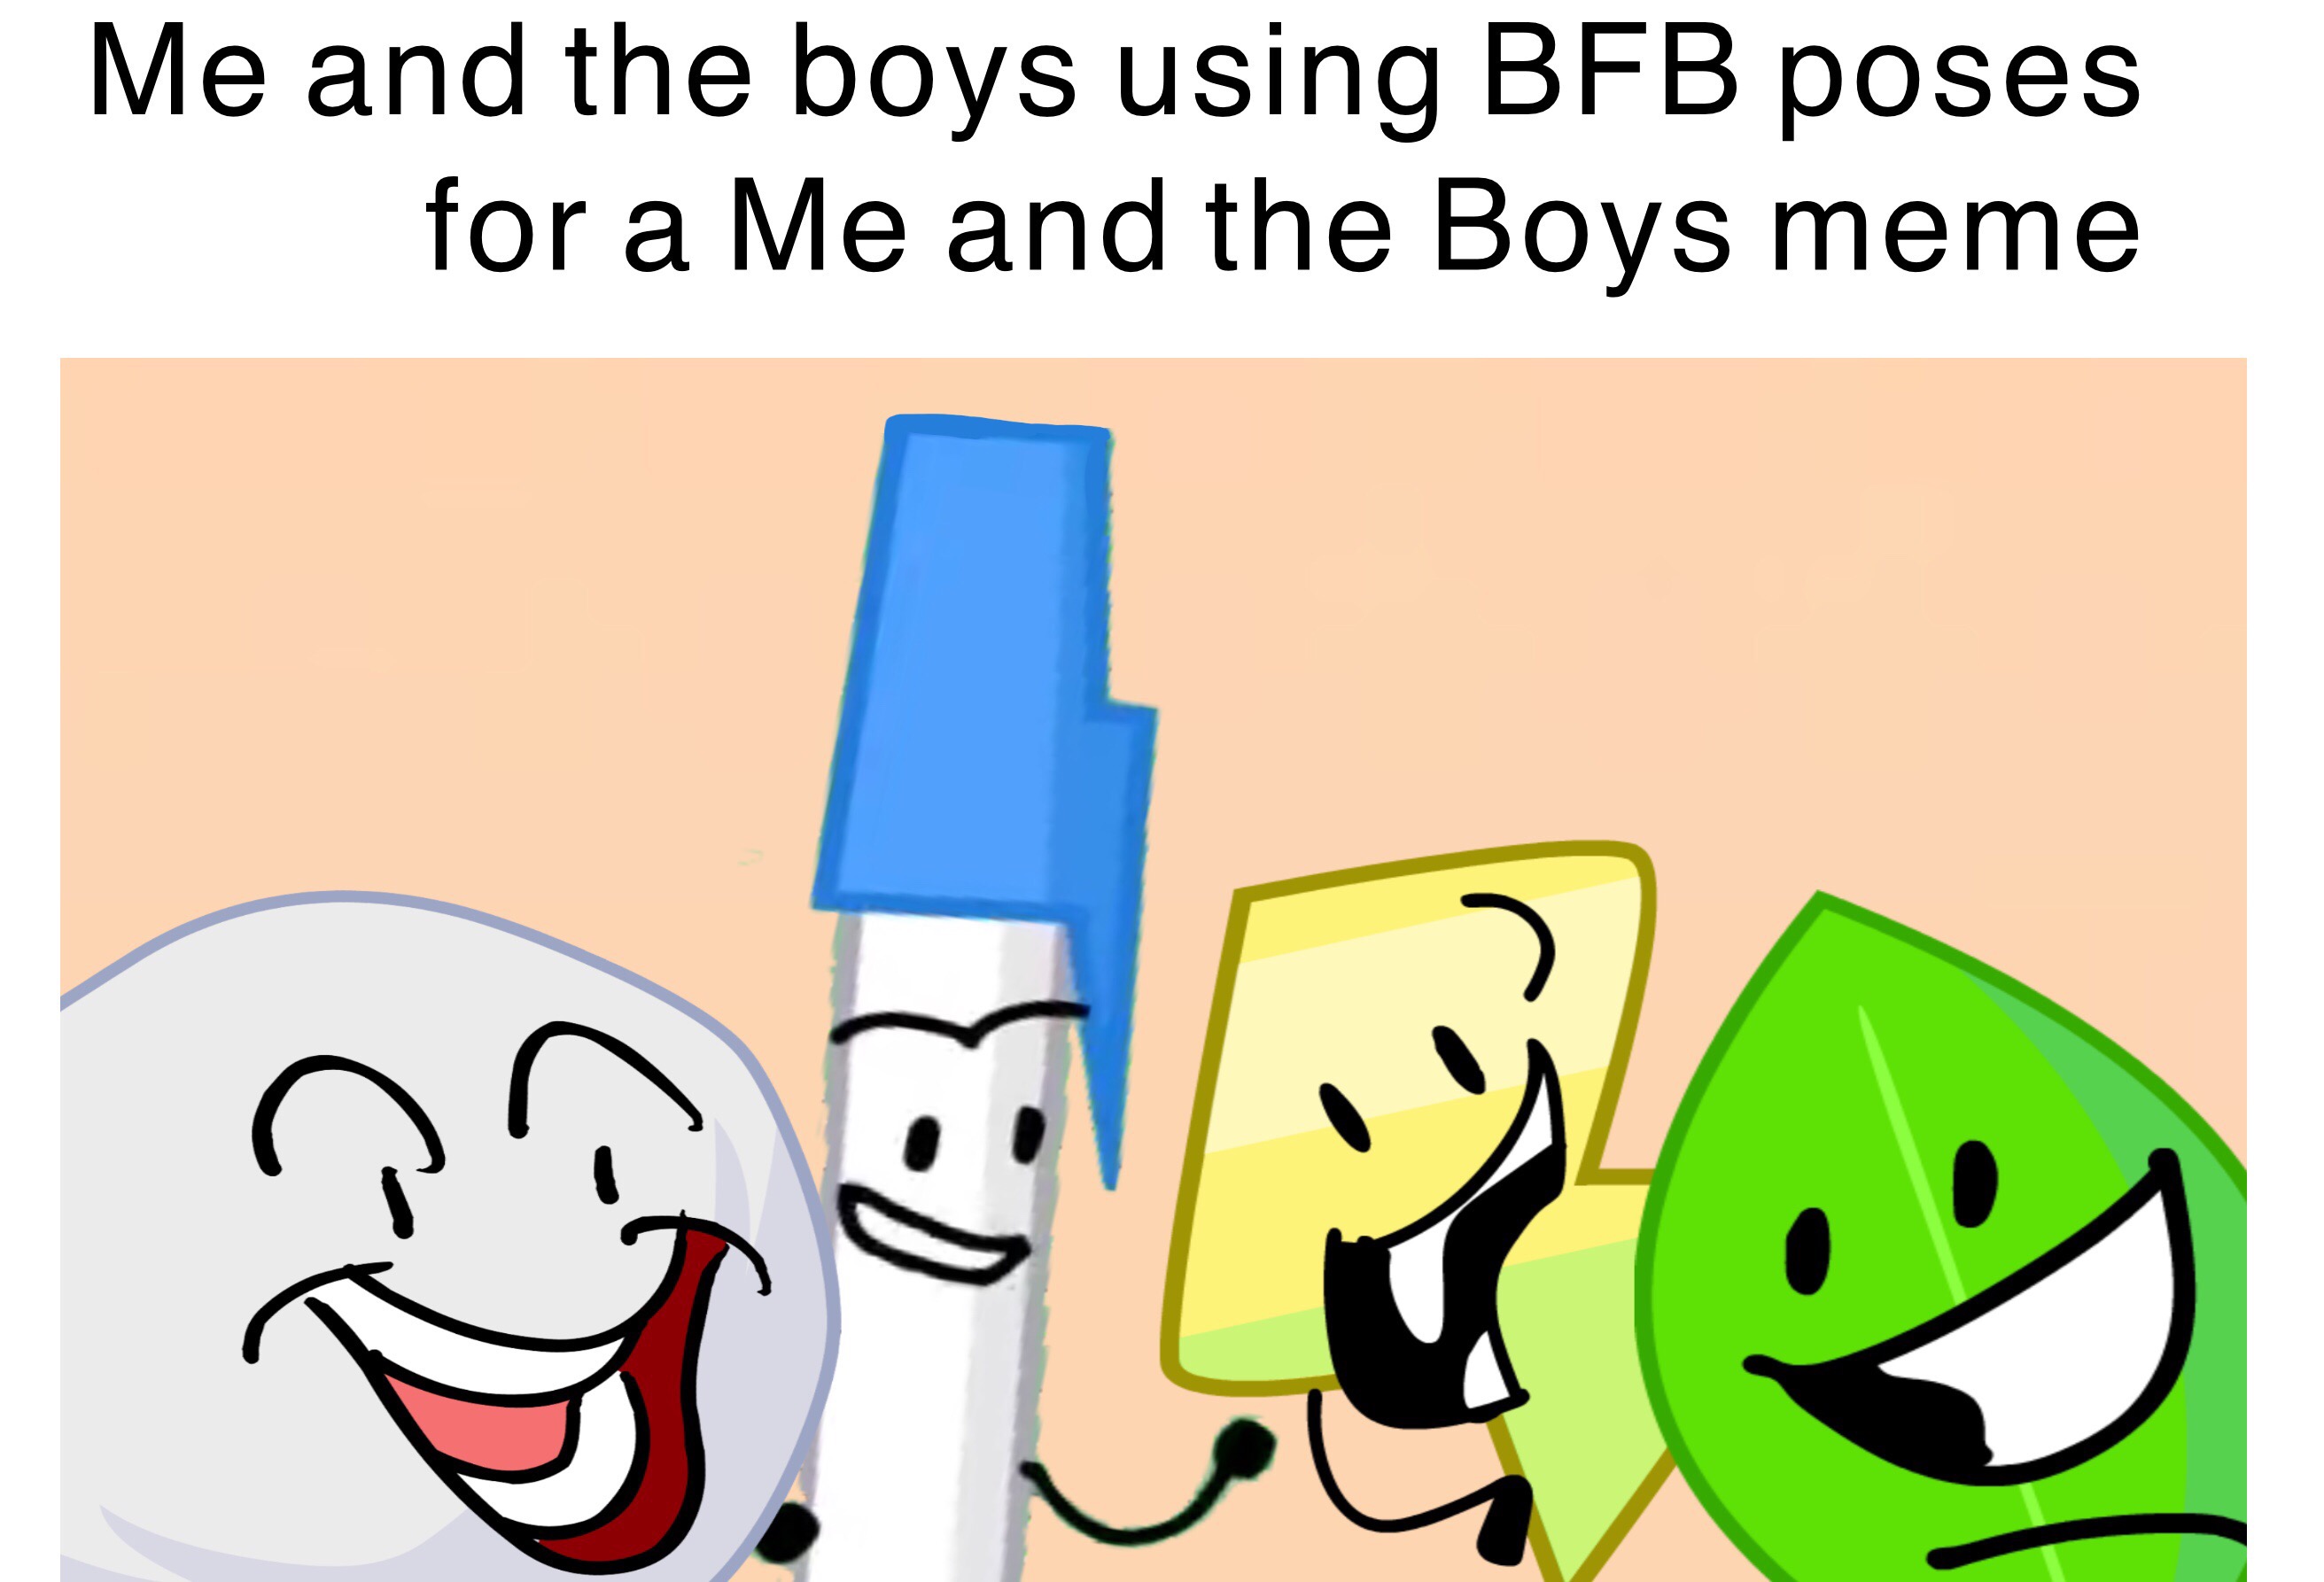 bfdi,made by me in in paint,feito por mim no paint. - Imgflip